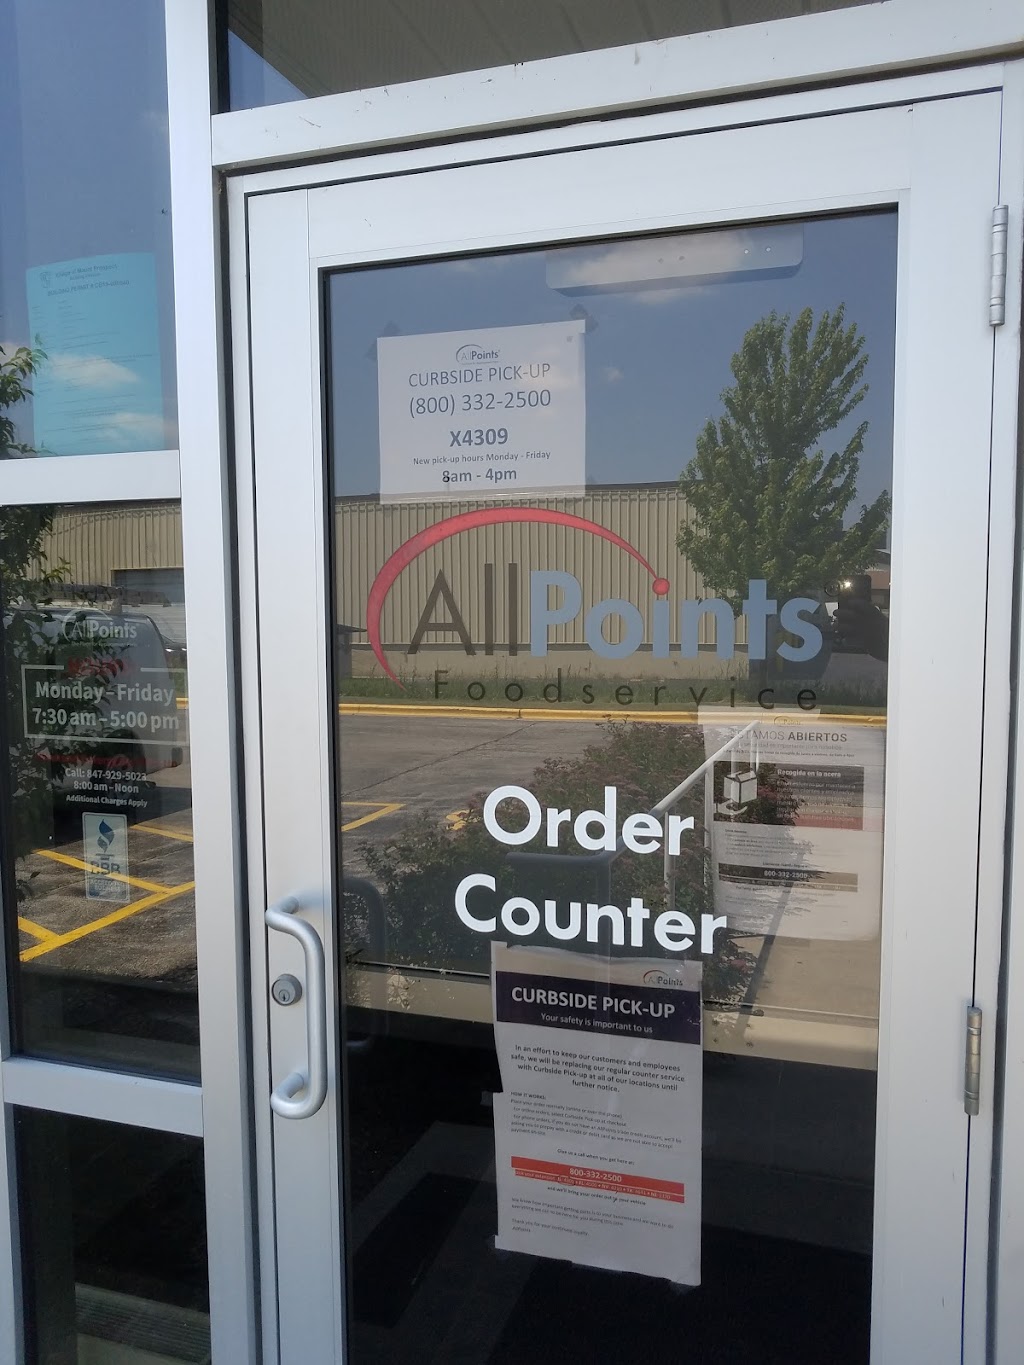 AllPoints Foodservice Parts & Supplies | 607 W Dempster St, Mt Prospect, IL 60056, USA | Phone: (800) 332-2500